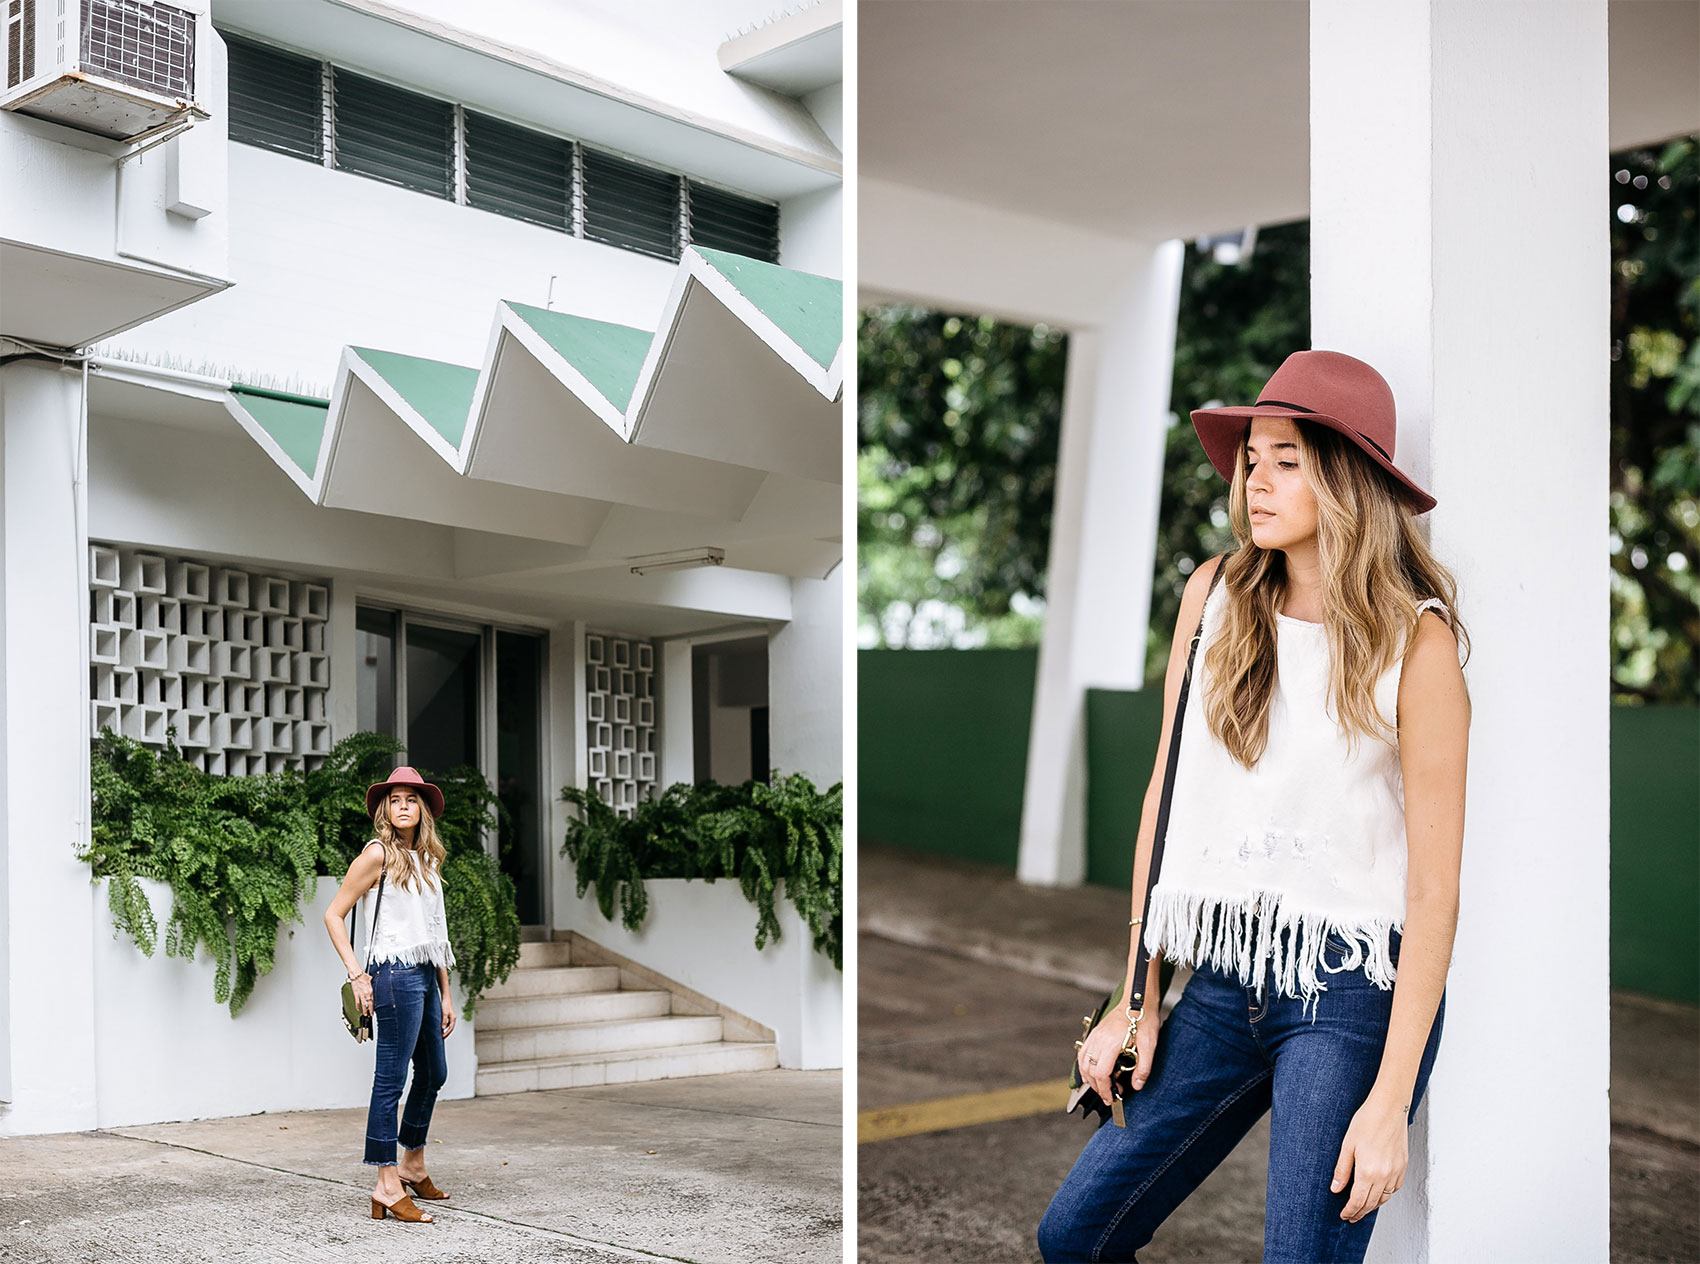 Maristella wearing a summer outfit with cropped flare jeans from Stradivarius and a boxy white denim top from Zara, suede mules from Zara and fedora hat from Asos, bag from Coach